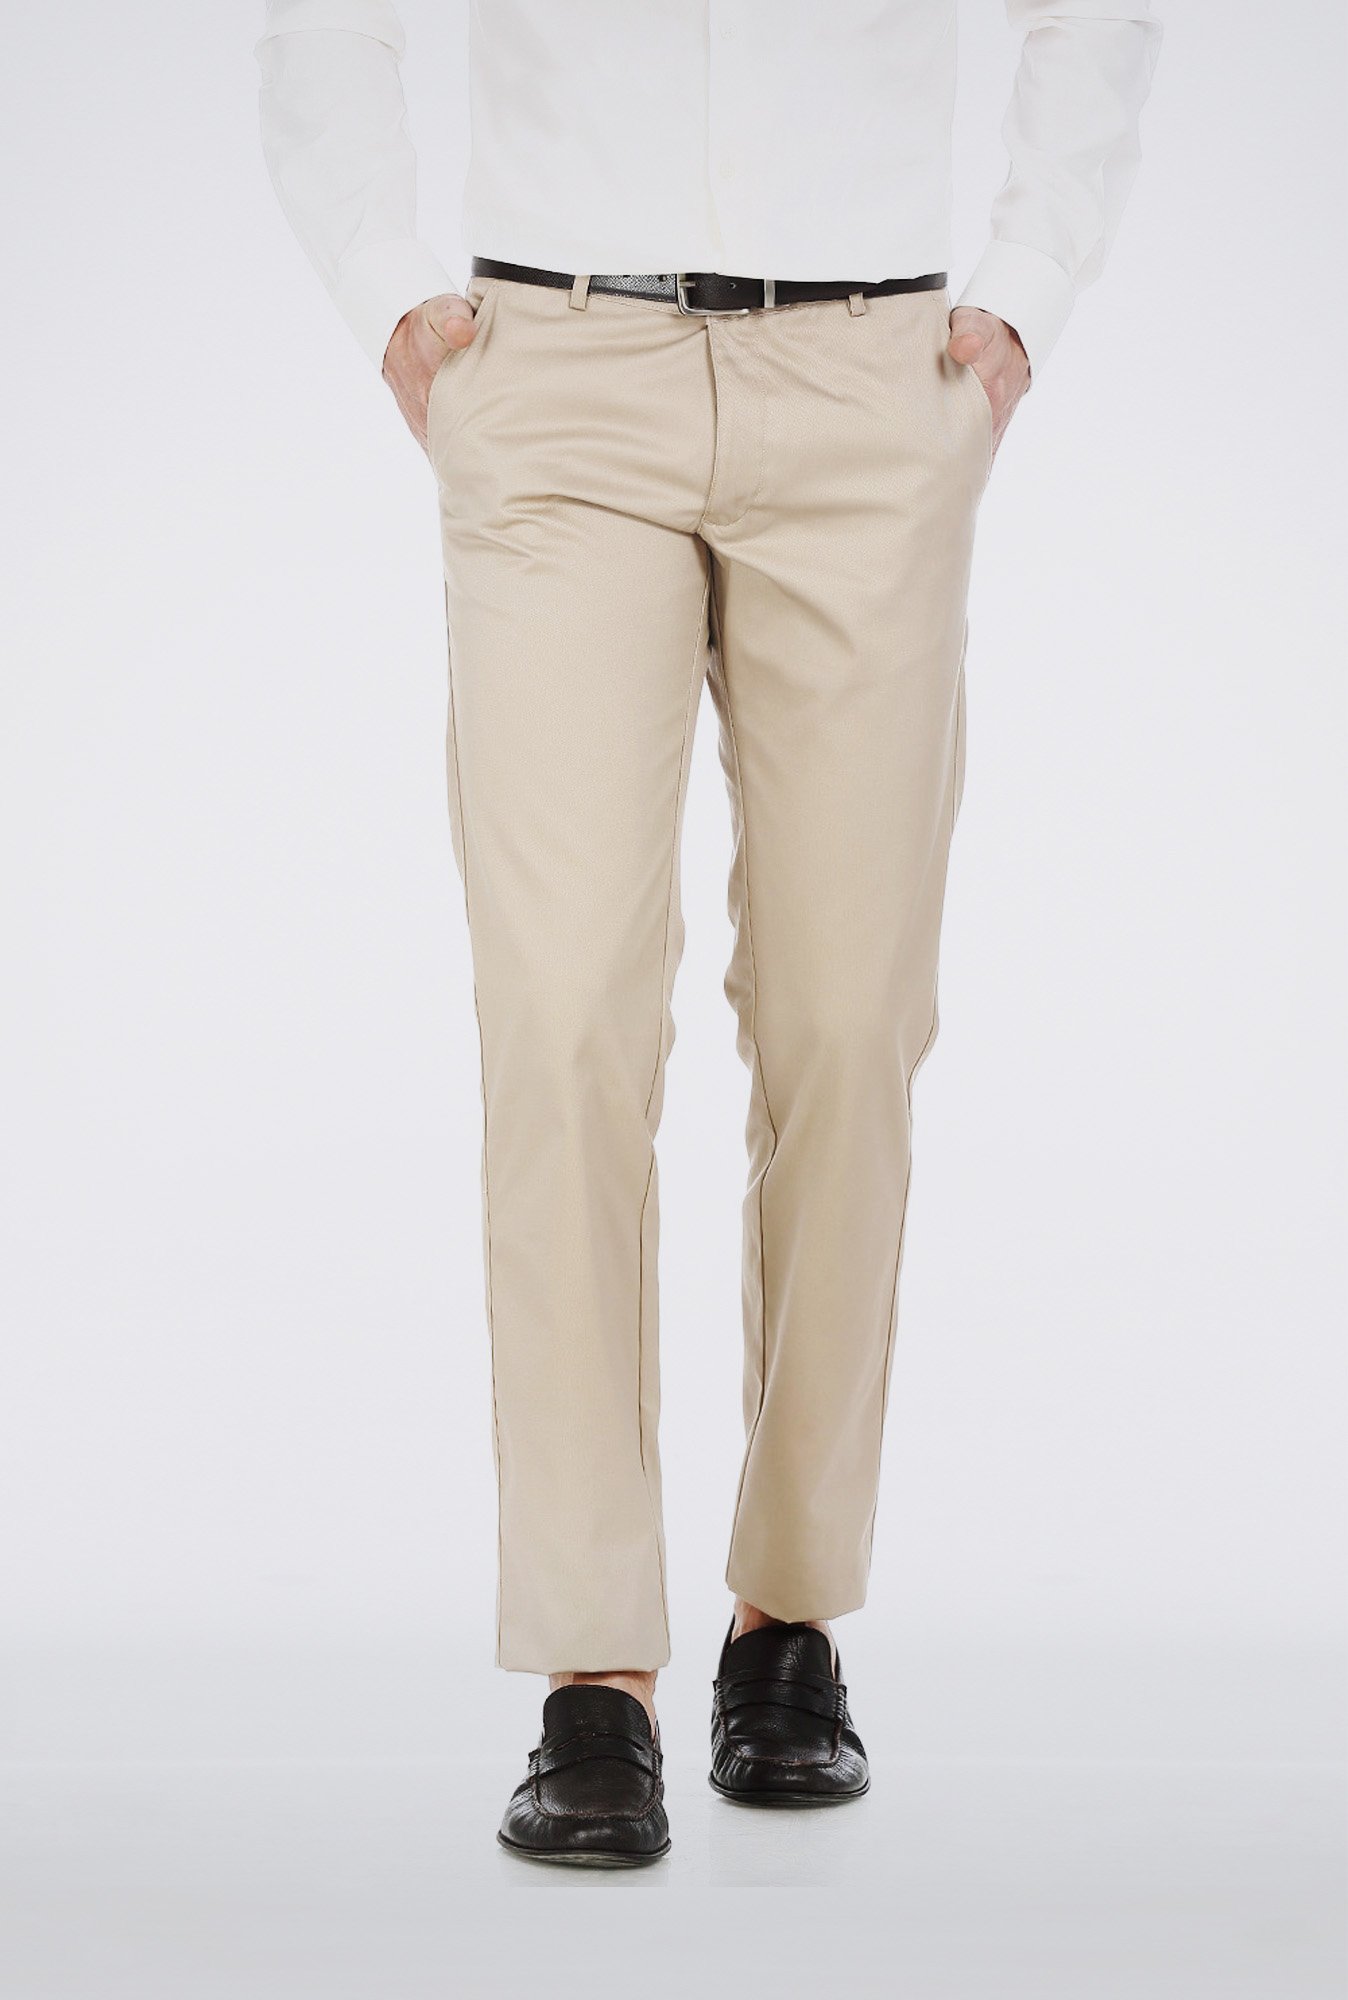 Mineral Grey Stretch Pants